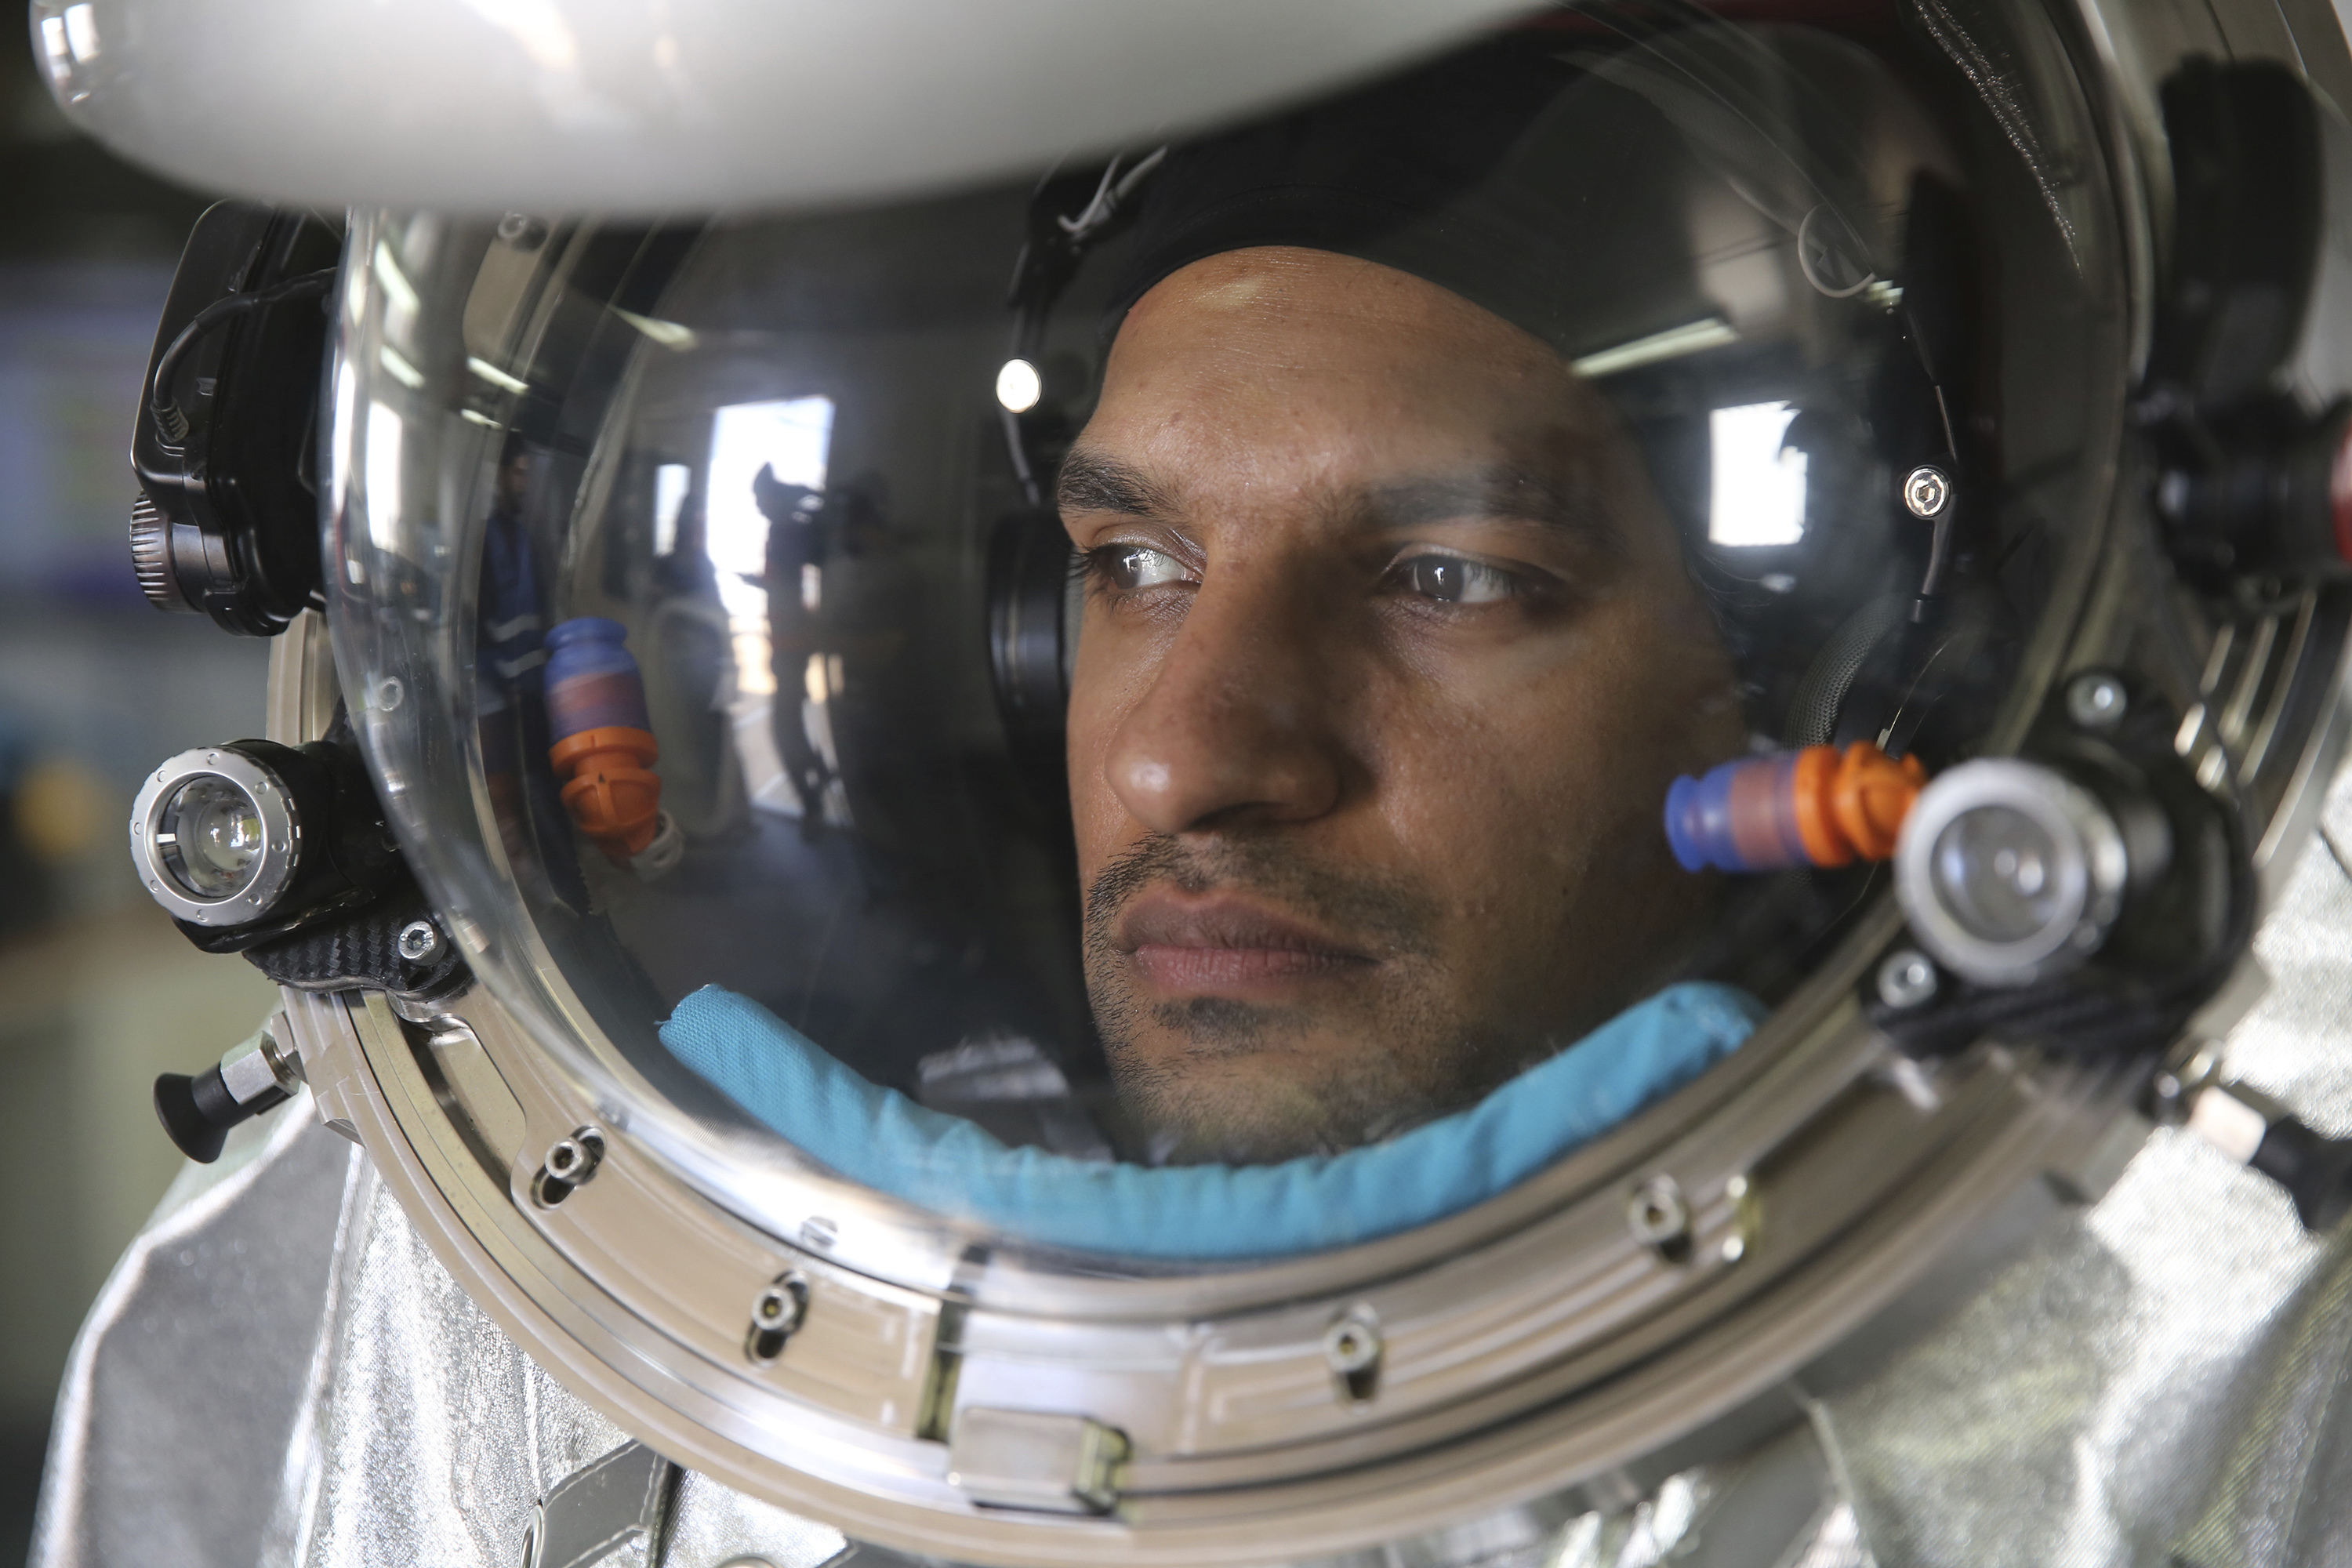 Analogue astronaut Kartik Kumar wearing an experimental space suit during a simulation of a future Mars mission in the Dhofar desert of southern Oman (Sam McNeil/AP)